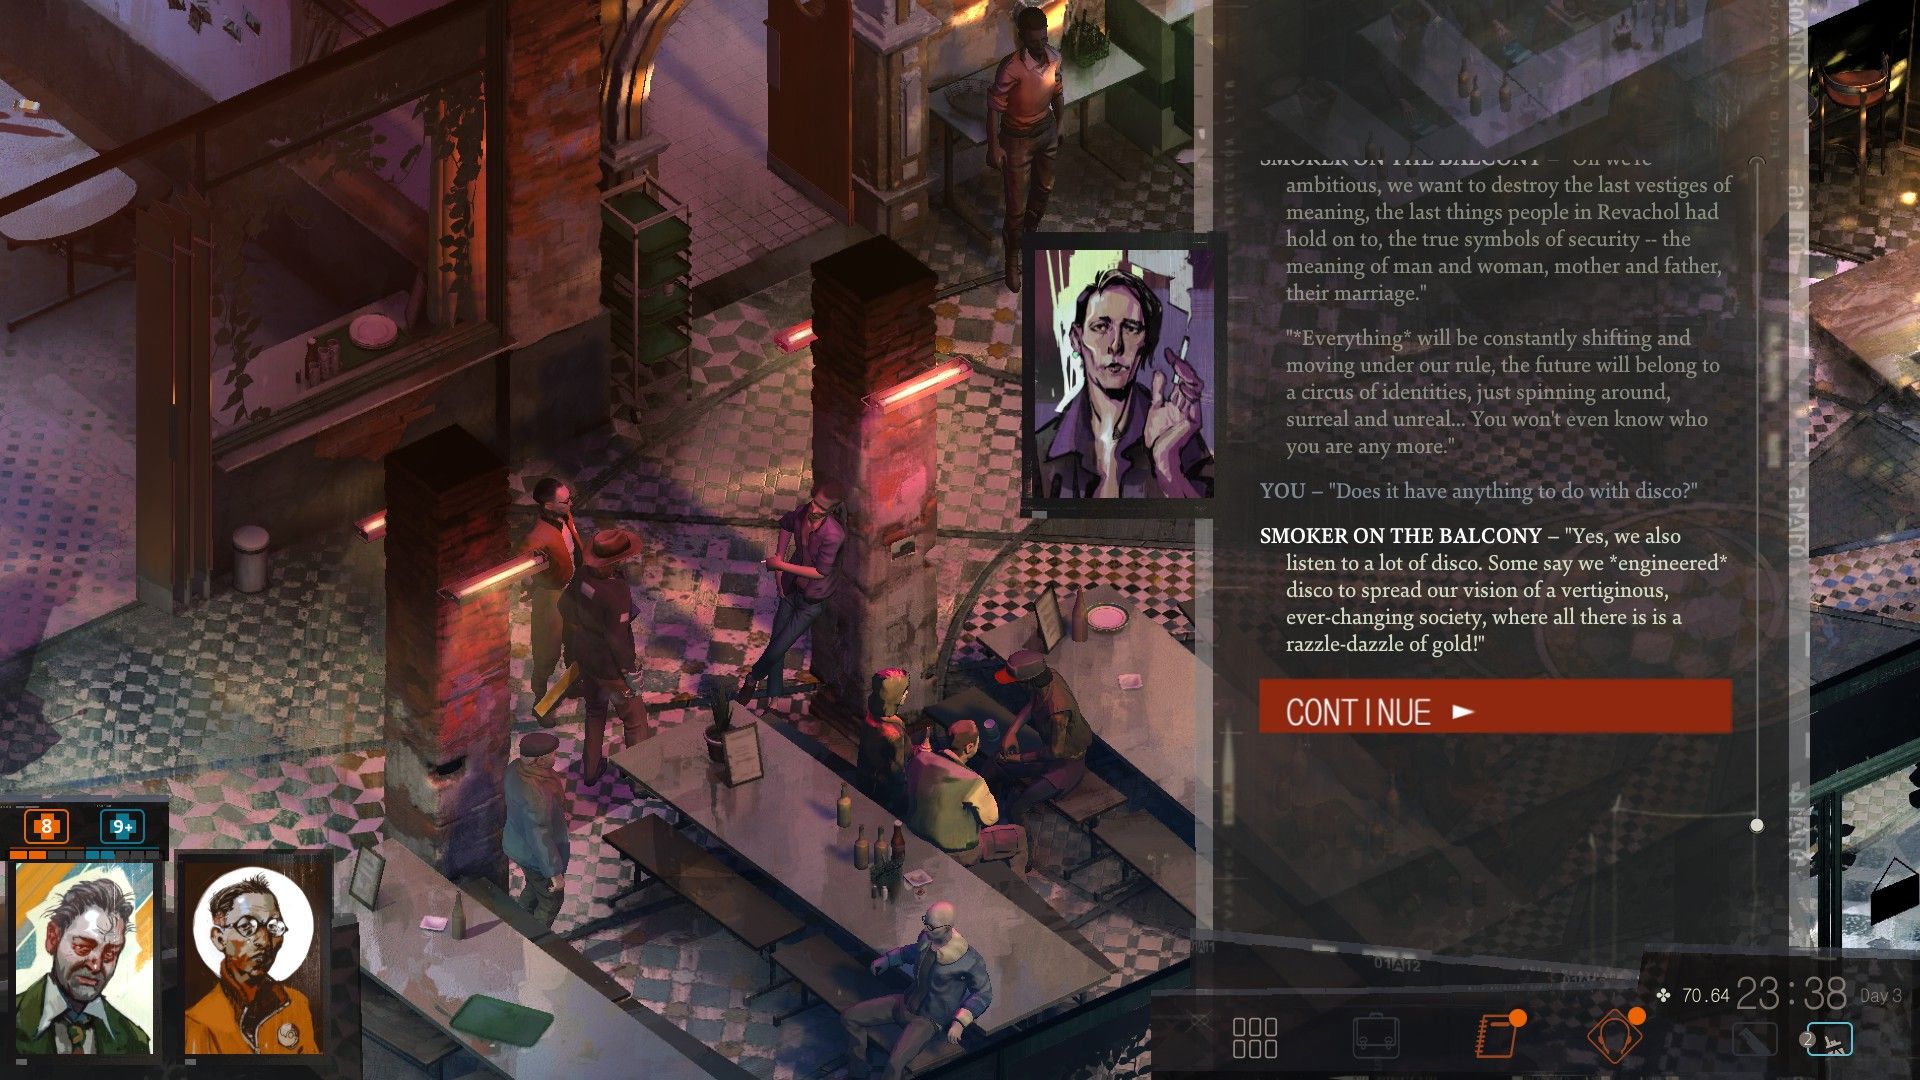 Disco Elysium Review A Daring and Gorgeous RPG